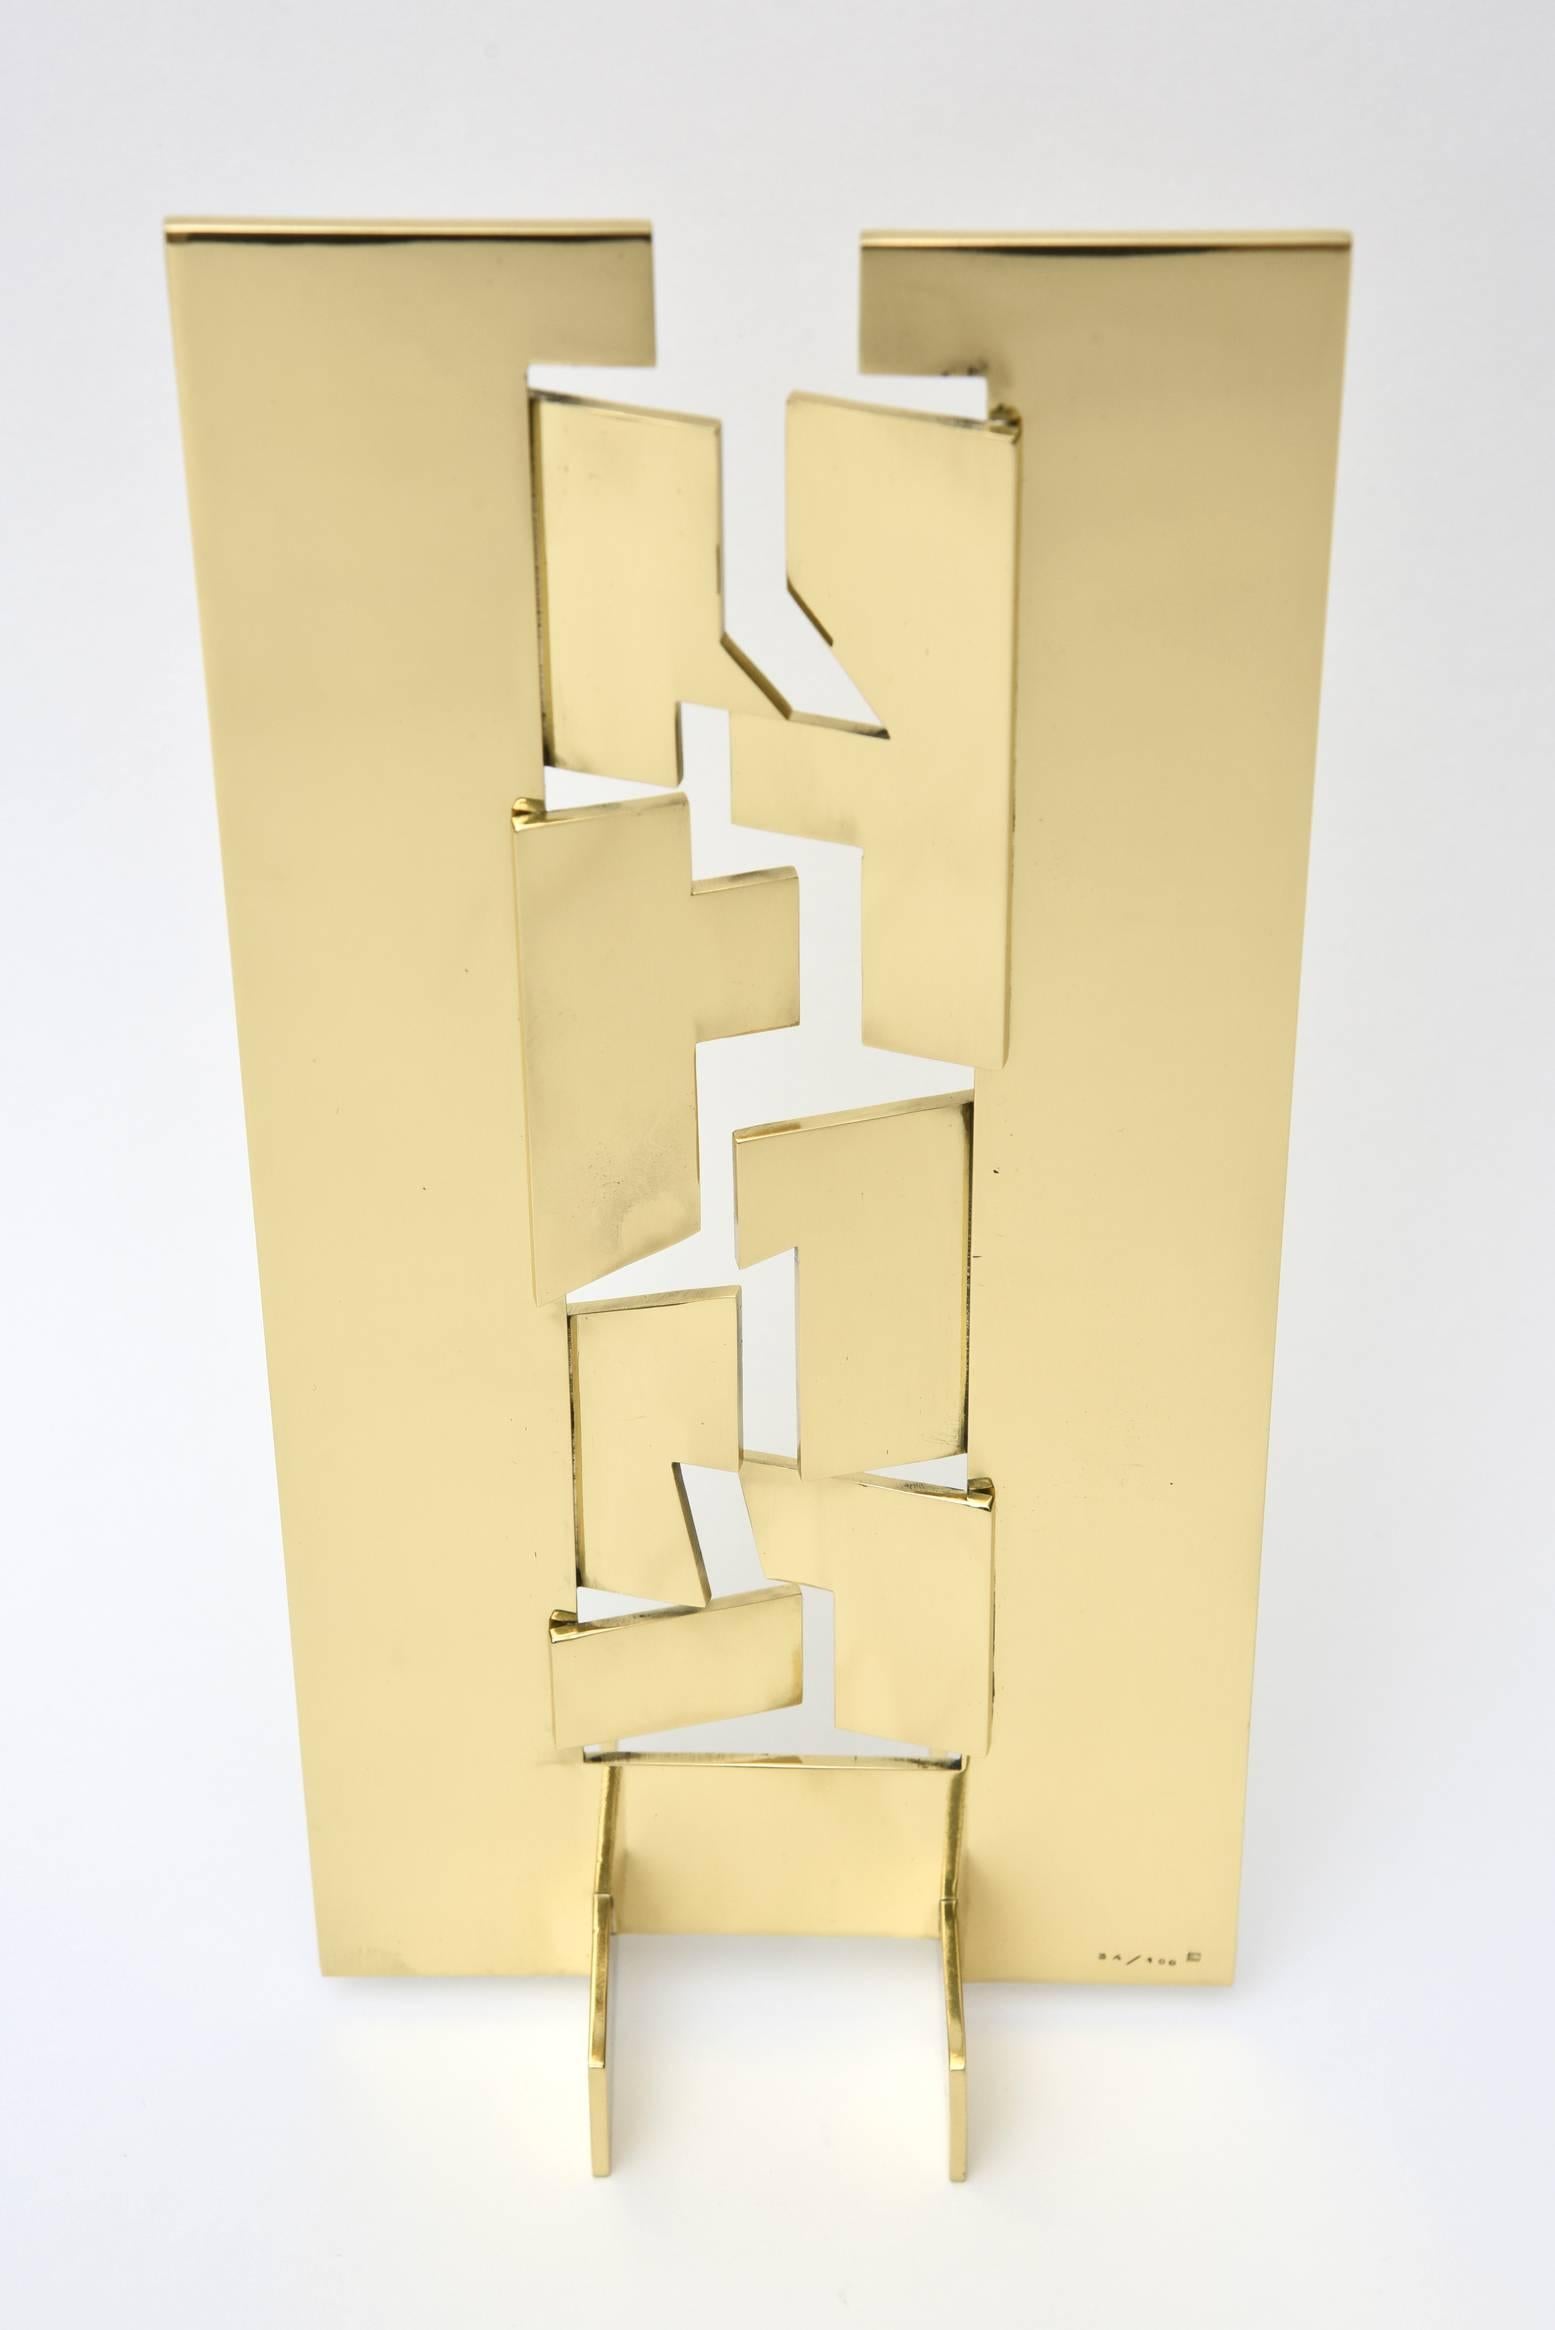 This wonderful cut-out planes of brass make up the center of this modernist  and minimalist cascading tabletop sculpture by Francesco Maarino di Teanna. It is signed MOT and the edition is 34/100 as shown in the photos.  This is the artist's